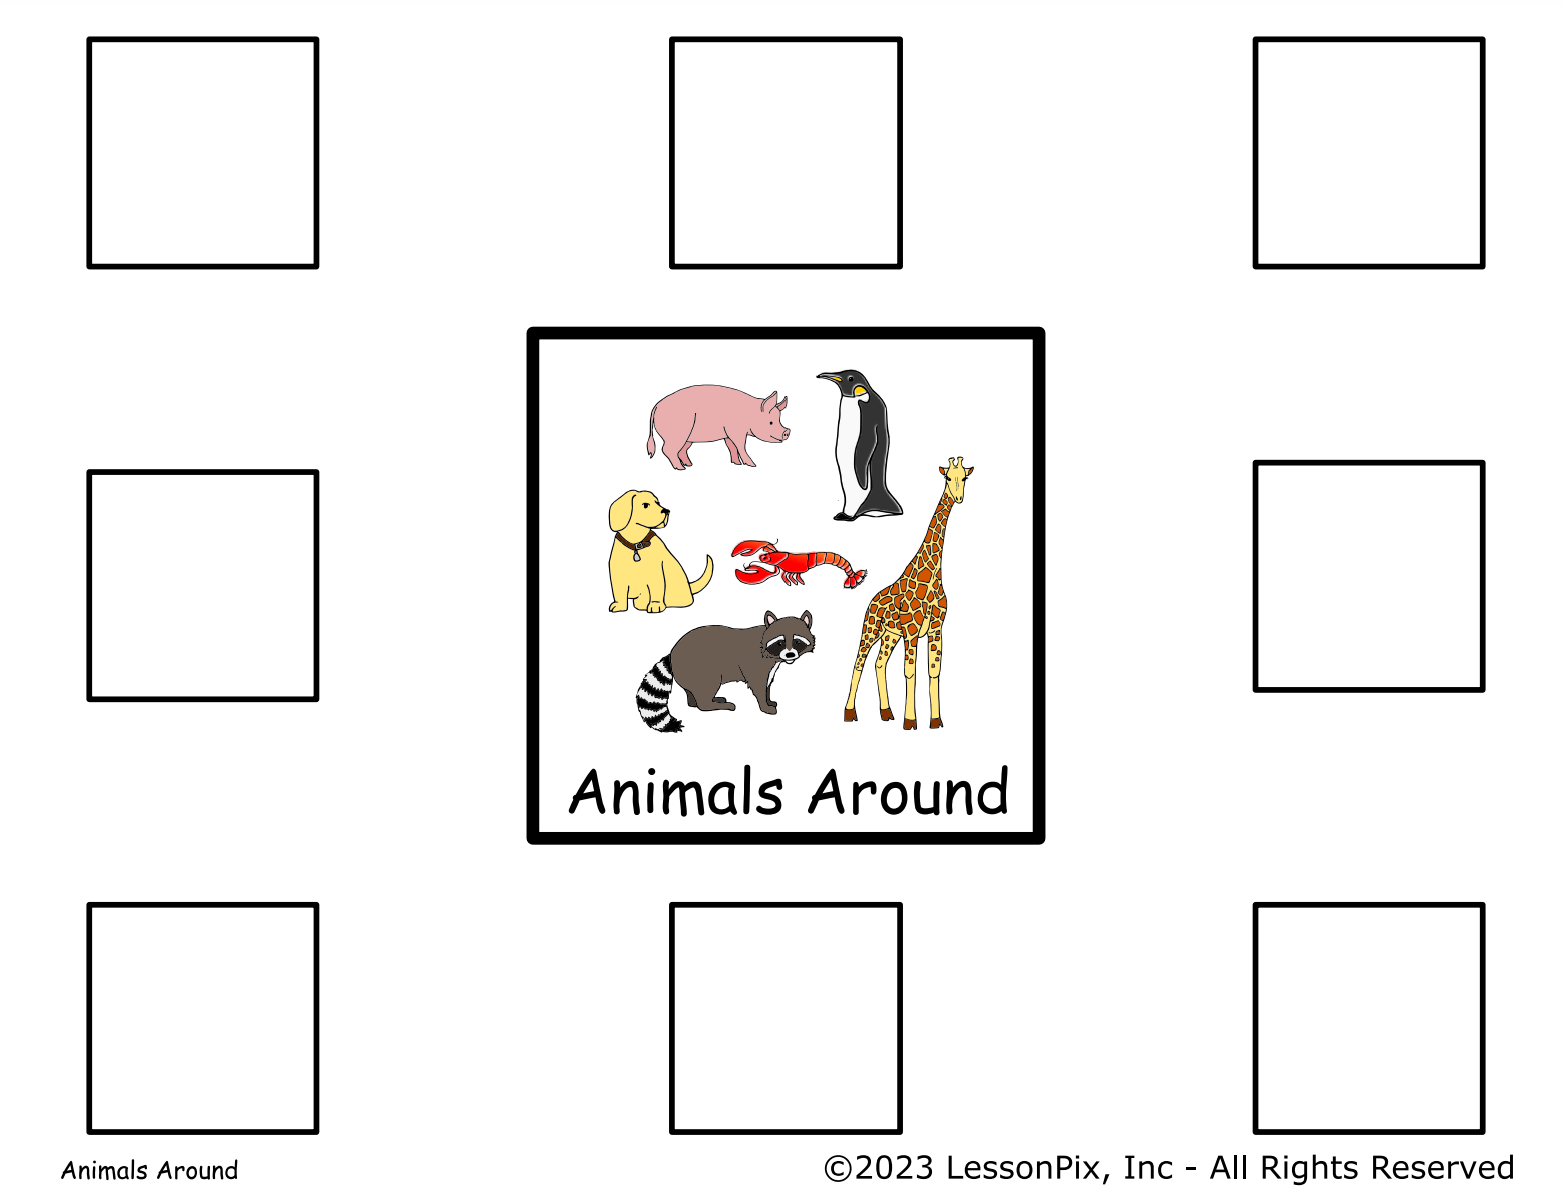 A semantic map with a center picture of animals and 8 blank squares surrounding it